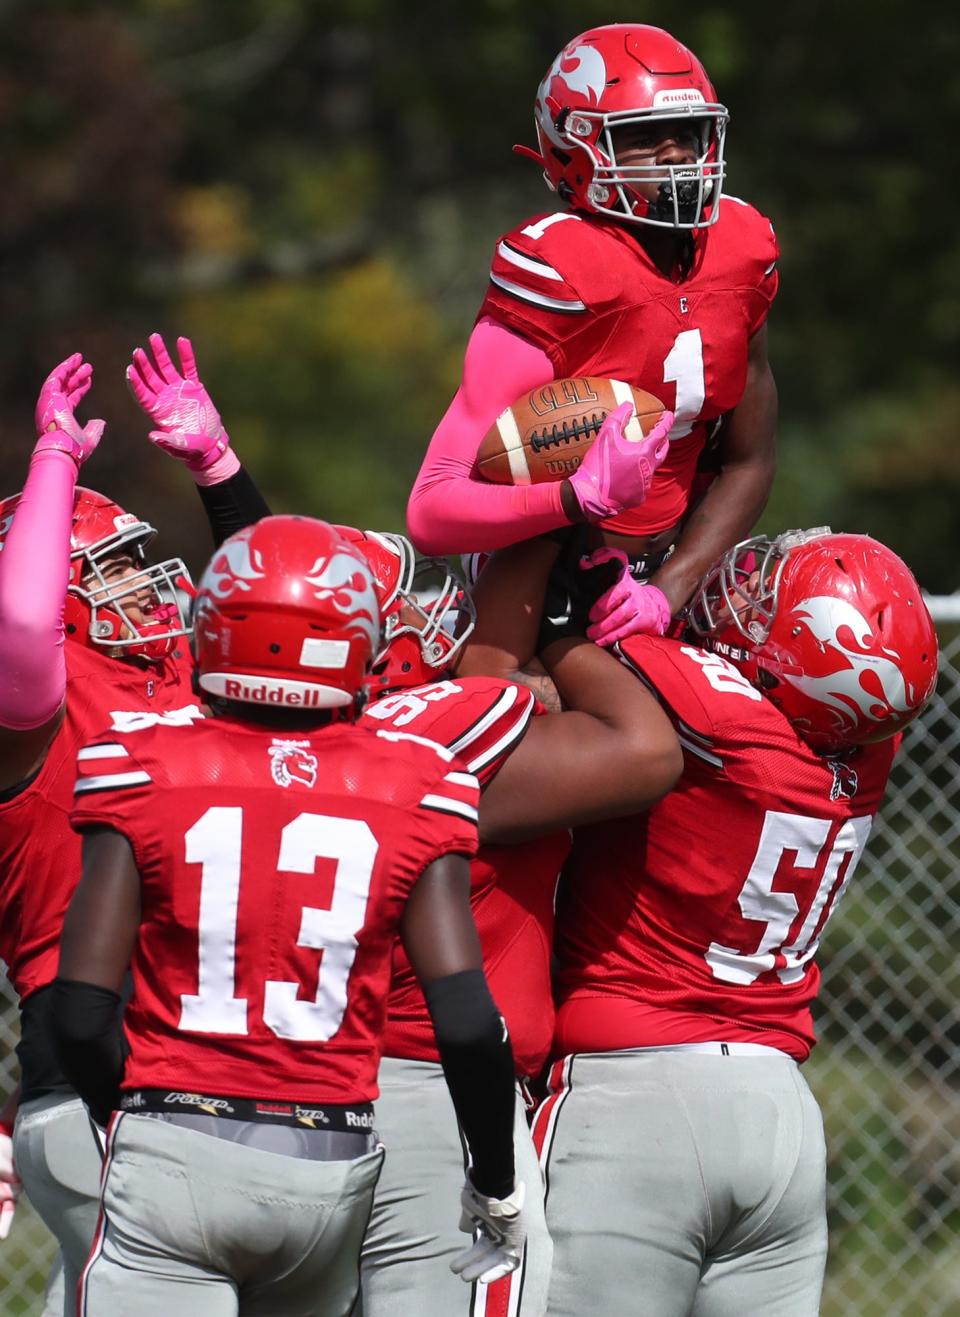 East's Eric Holley III is lifted up by his teammates after he scored against Buchtel in their City Series game at Buchtel High School on Saturday, Oct, 2, 2021 in Akron.